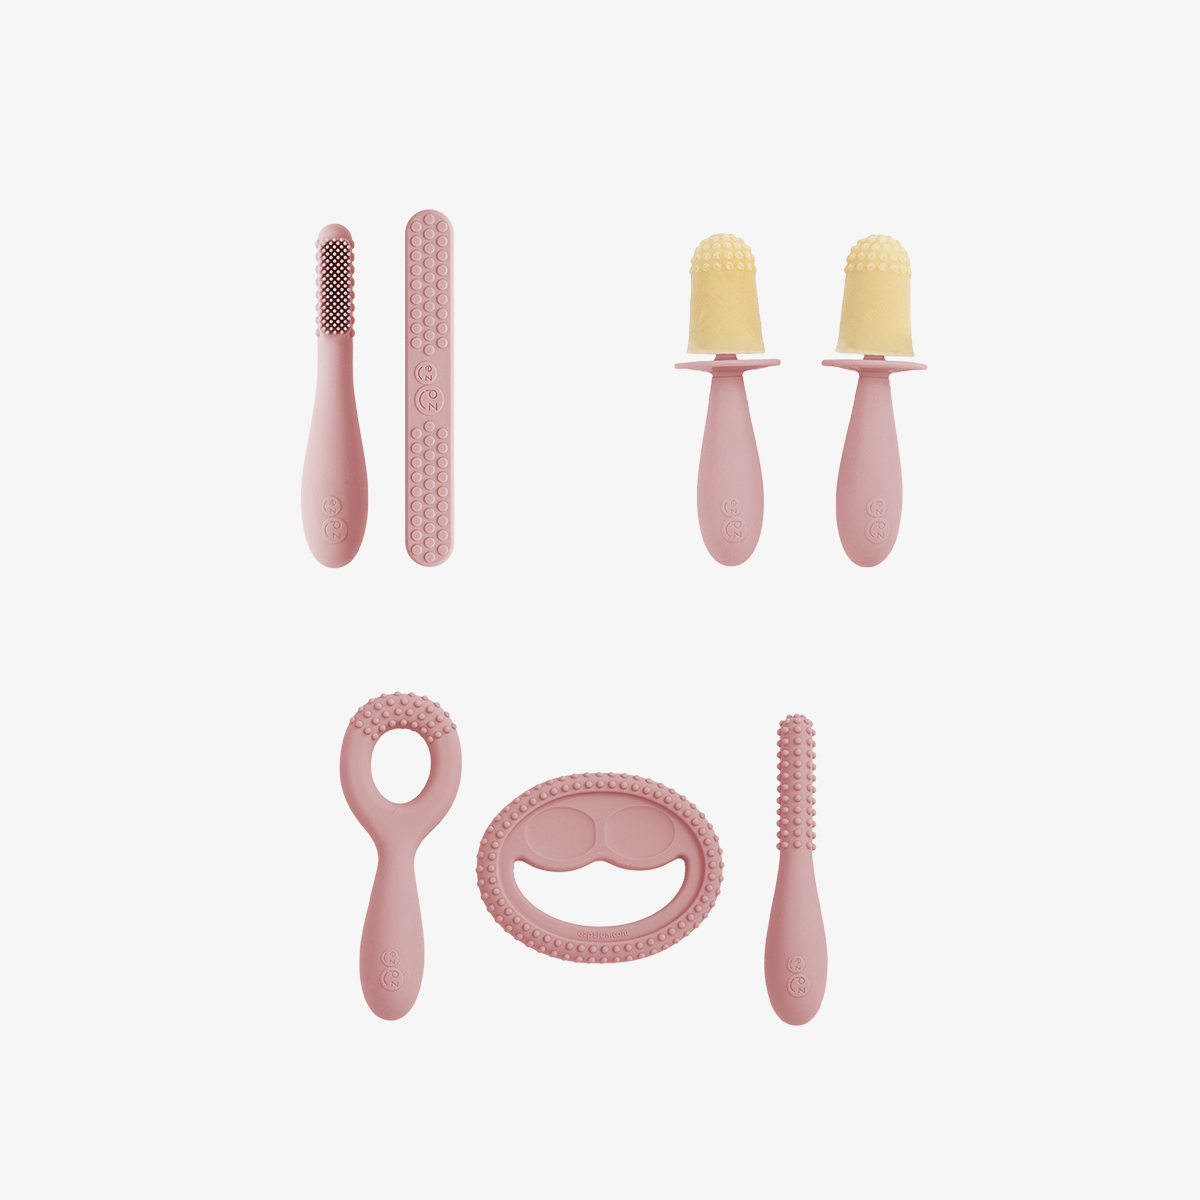 Pre-Feeding Oral Care Bundle in Blush Pink / ezpz Baby-Led™ Toothbrush + Sensory Tongue Depressor Dual Pack, Tiny Pops and Oral Development Tools